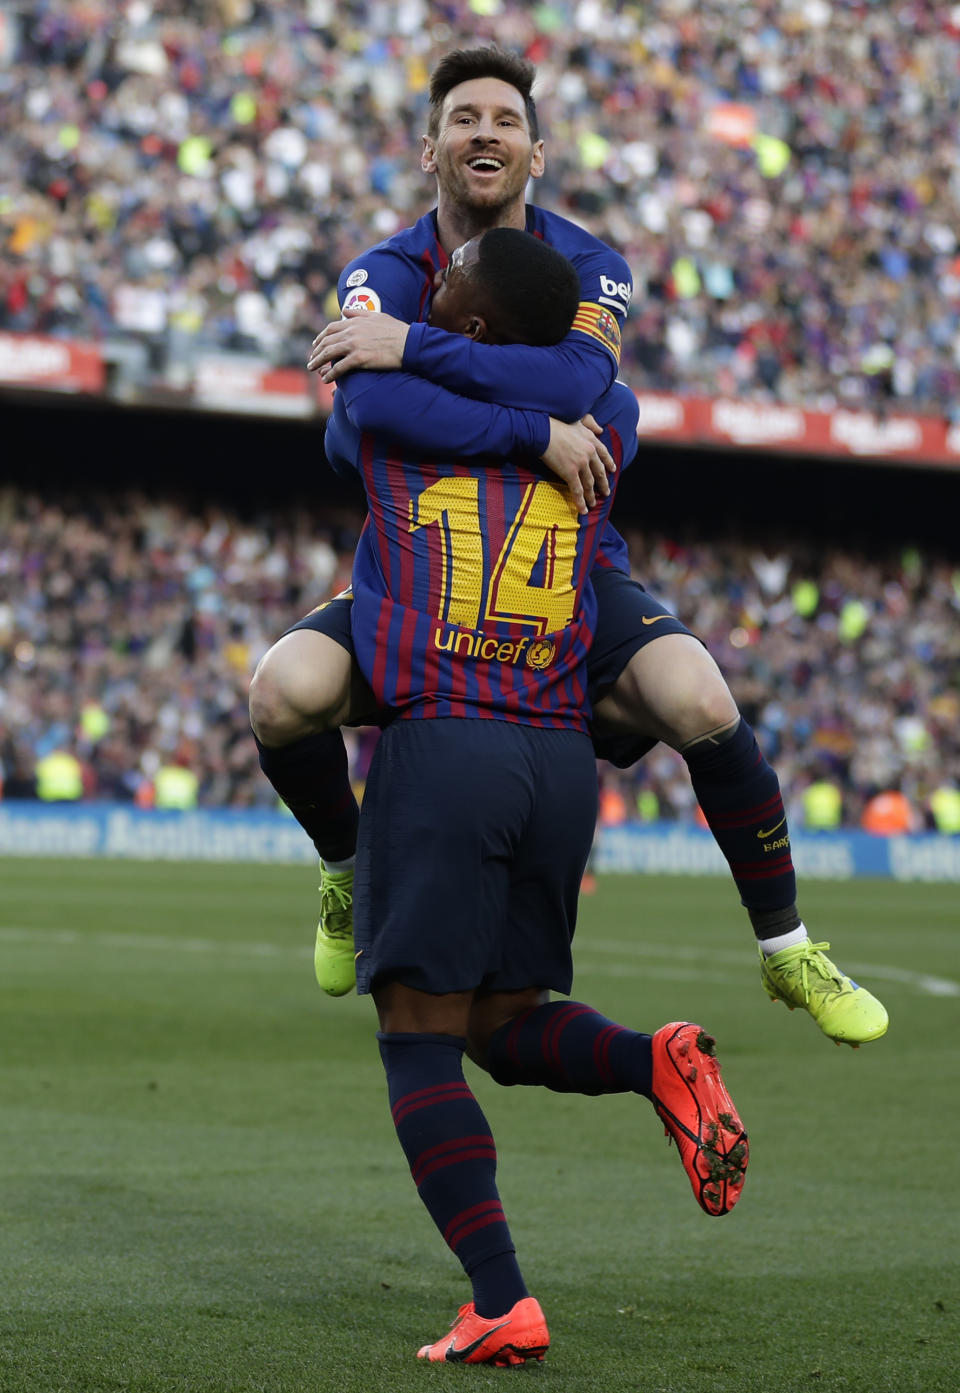 Barcelona's Lionel Messi, top, celebrates with Malcom after scoring his side's second goal during a Spanish La Liga soccer match between FC Barcelona and Espanyol at the Camp Nou stadium in Barcelona, Spain, Saturday March 30, 2019. (AP Photo/Manu Fernandez)